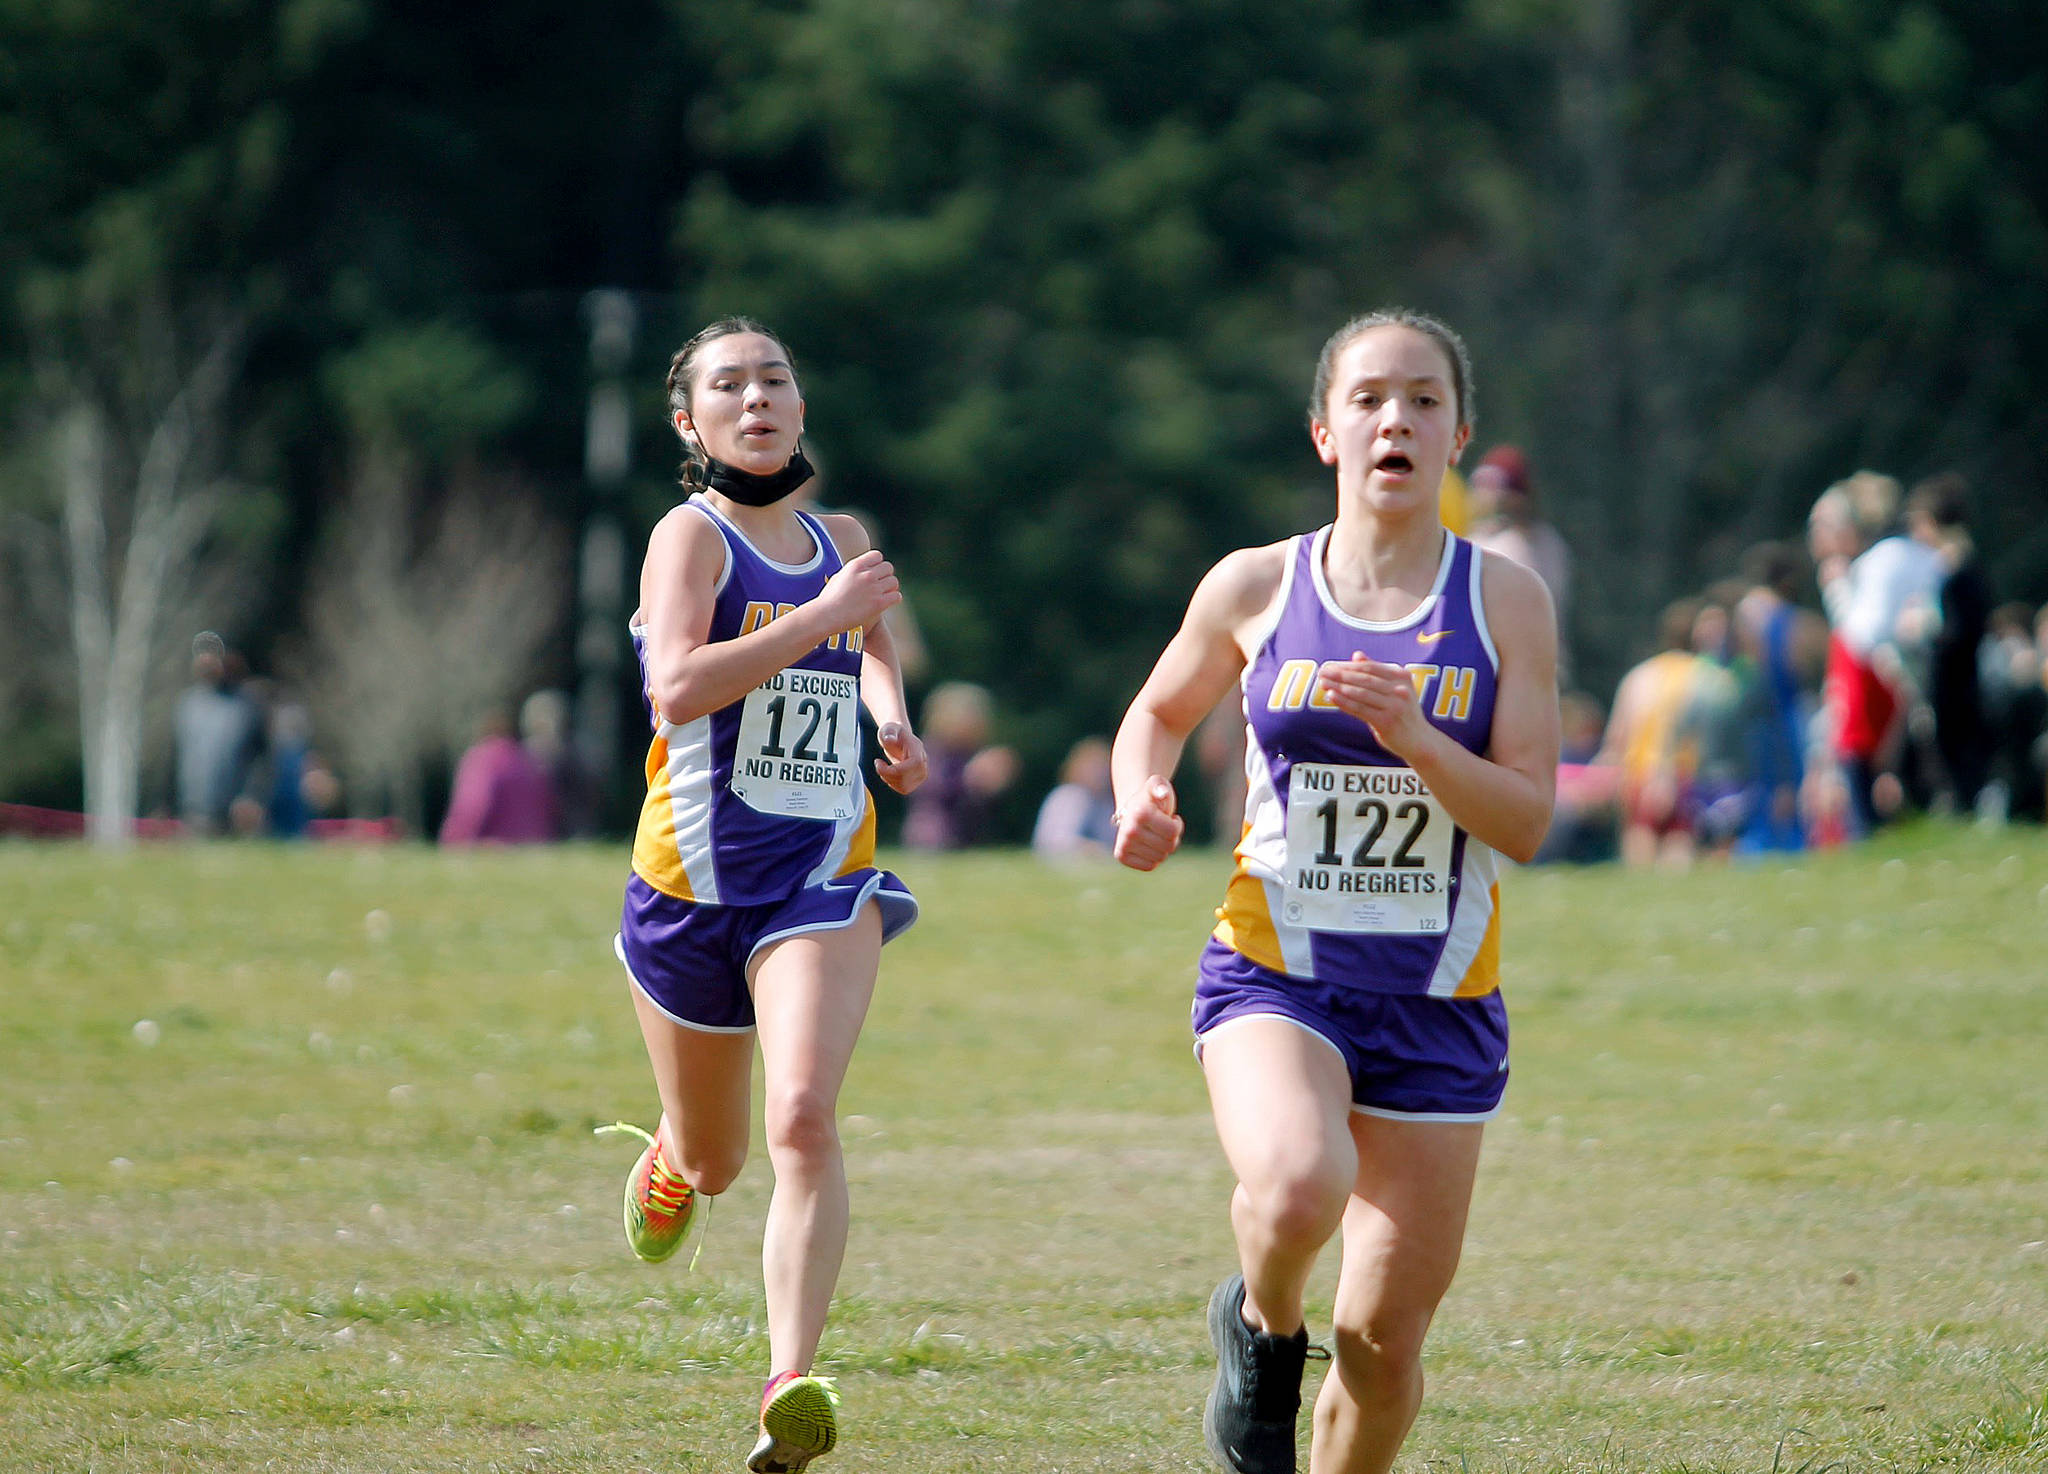 North Kitsap’s Genesi Funston and Salix Wartes-Kahl are among the top runners for this year’s cross country team. (Mark Krulish/Kitsap News Group)